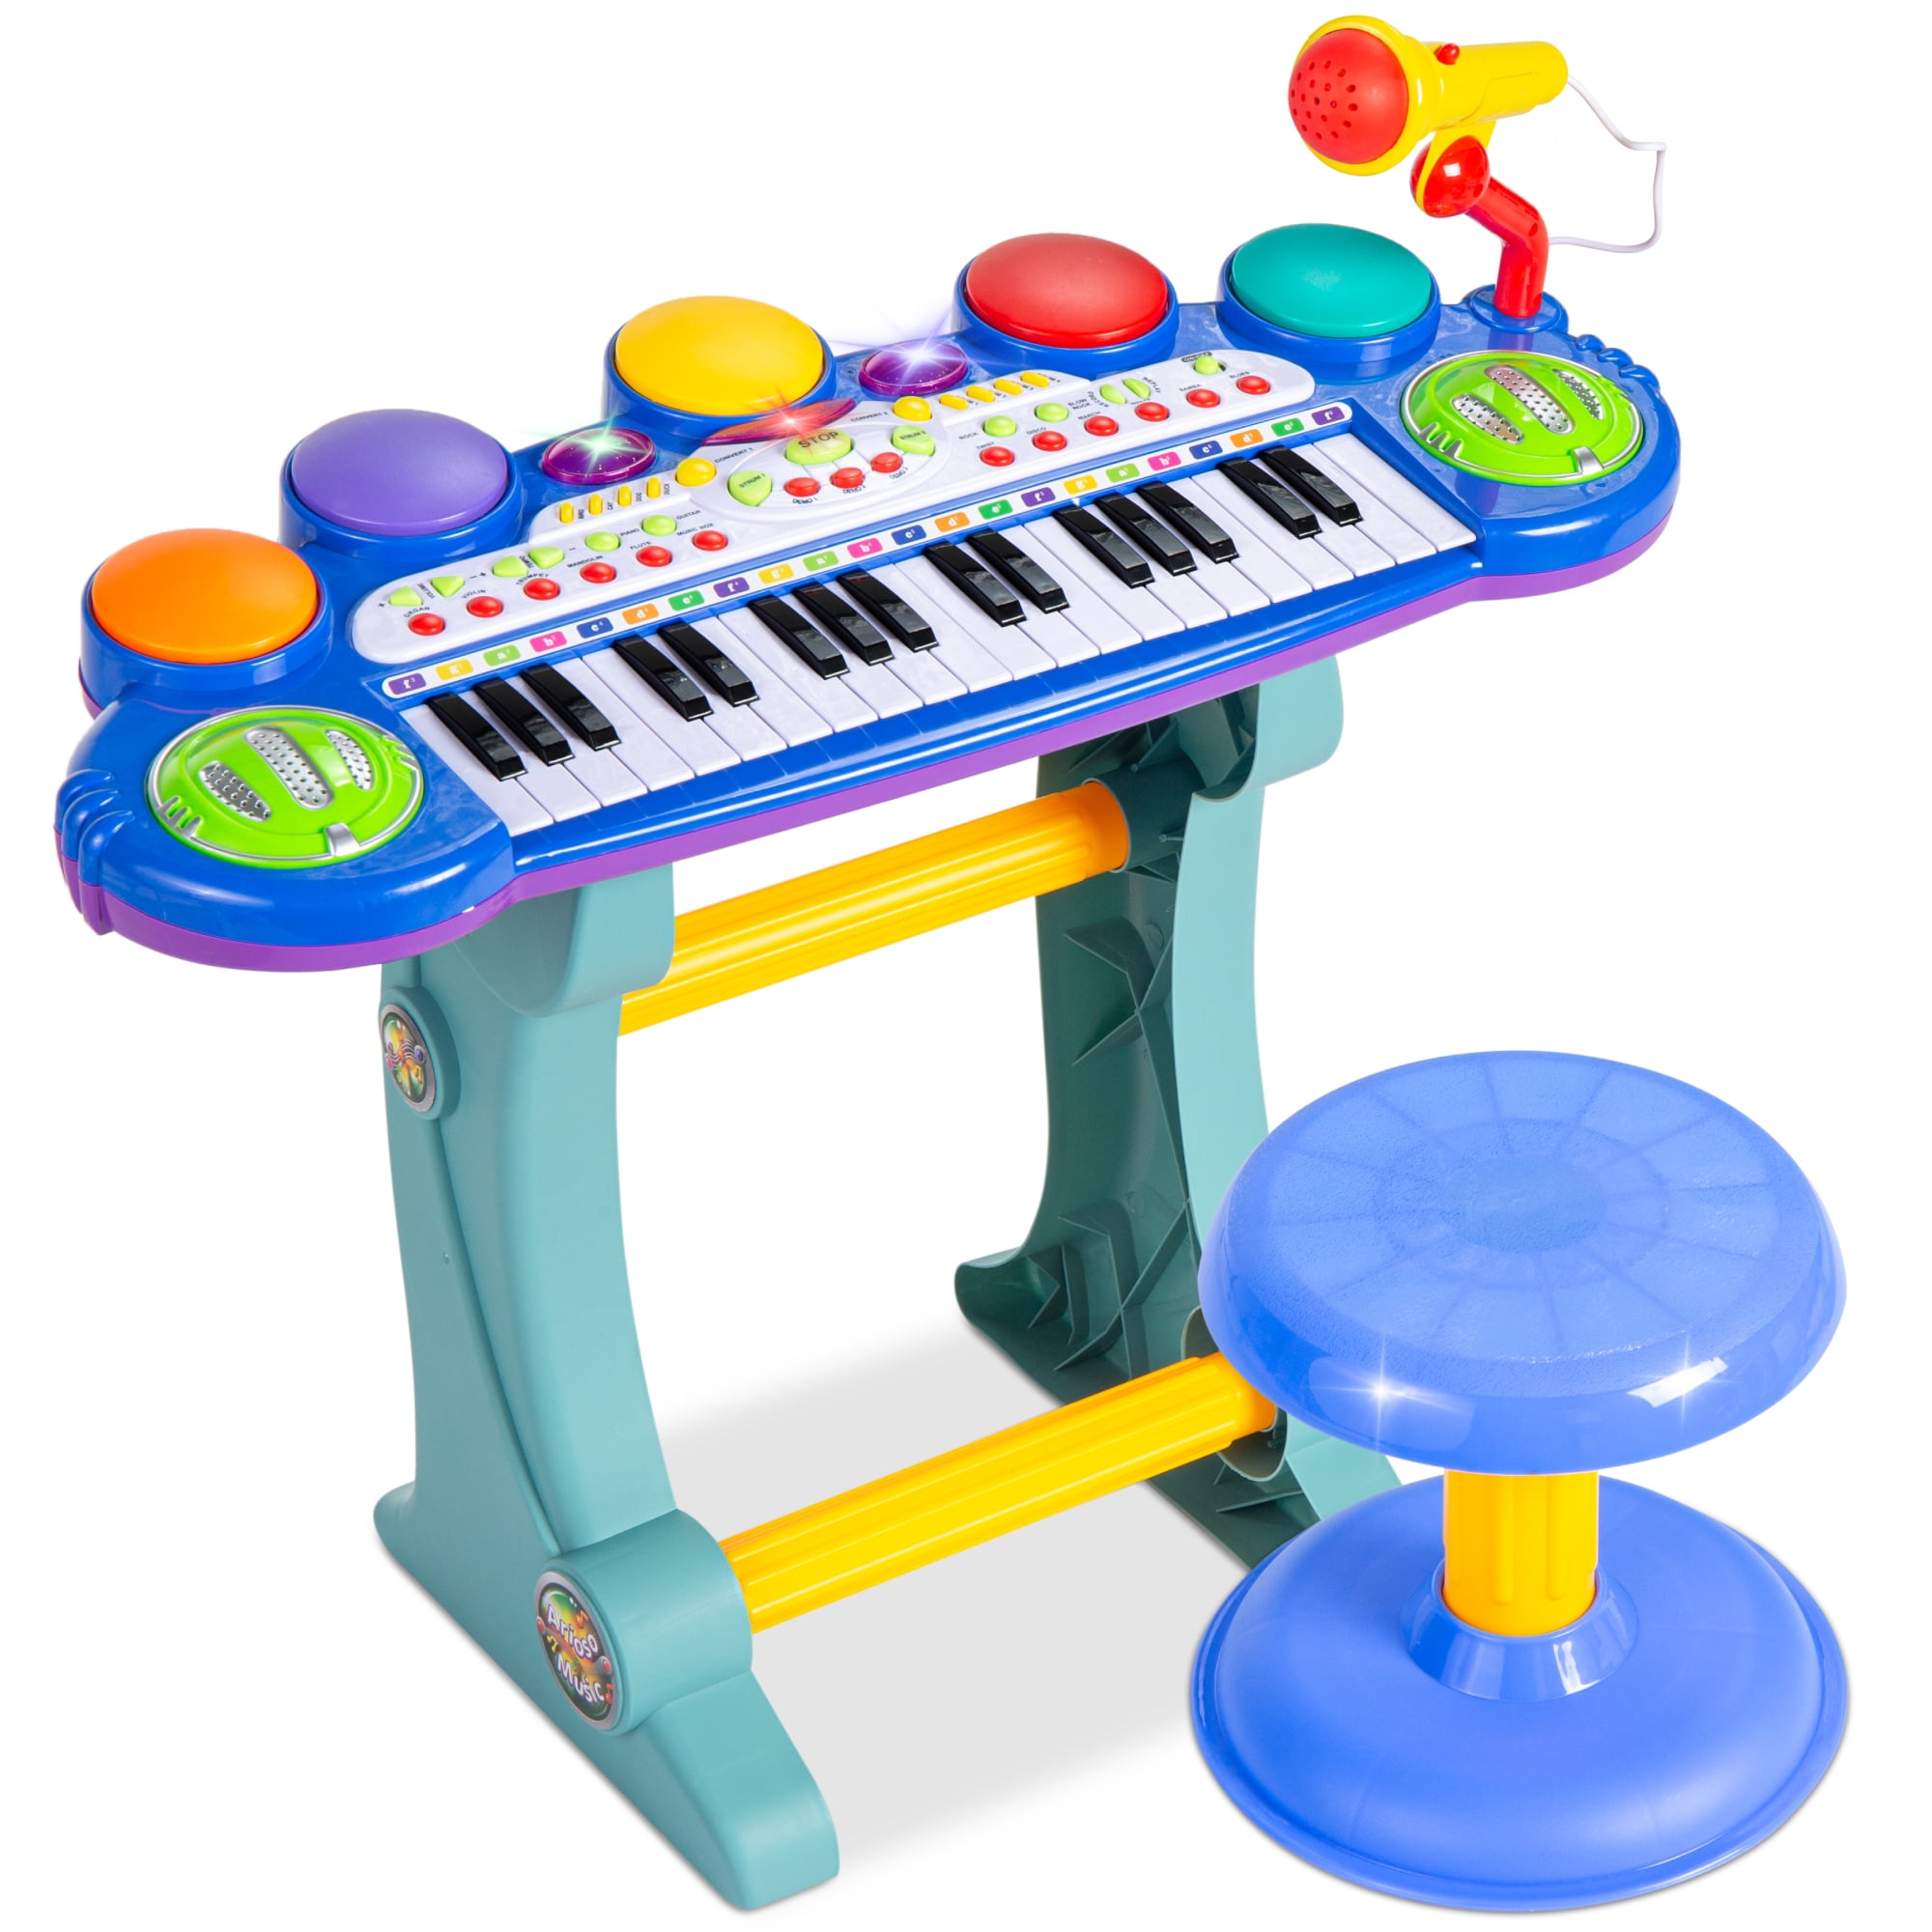 Choice Products 37-Key Kids Electronic Piano Keyboard w/ Multiple Sounds, Lights - Blue -